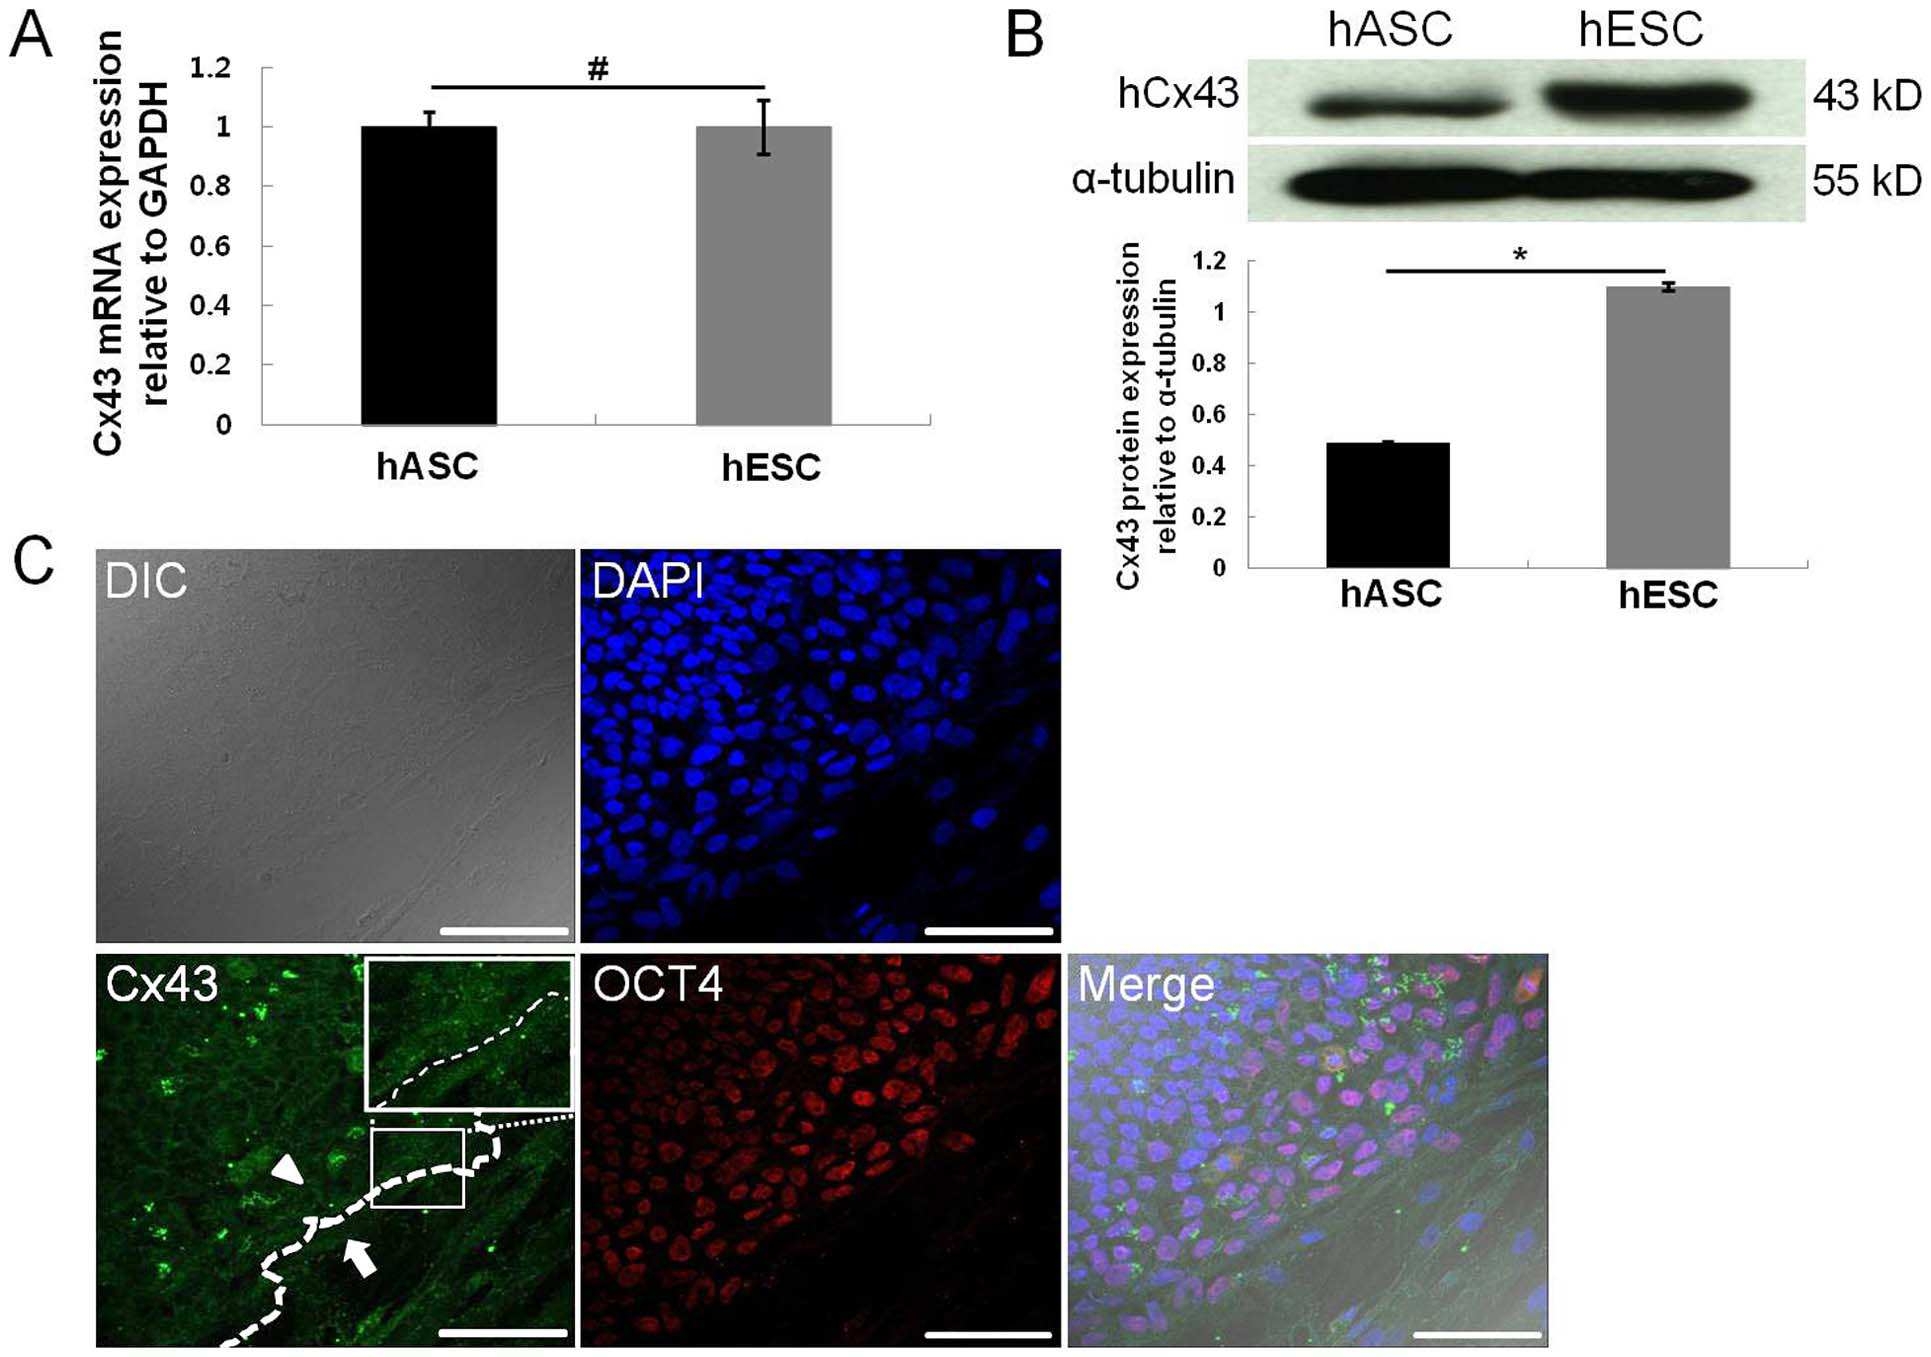 Expression of Cx43 in hESCs and hASCs. The expression of endogenous Cx43 in hESCs and hASCs was confirmed by qRT- PCR (A) and Western blot analysis (B). Expression of OCT4 (red) and Cx43 (green) in hESCs and hASCs was observed by immunocytochemistry (C). Nuclei were counterstained with DAPI (blue). The arrow head indicates the expression of endogenous Cx43 in hESCs adjacent to hASCs (arrow). The white box indicates the Cx43 expression at the border line. All data are shown as the mean 6 the standard deviation (SD) (n = 4; # , p.0.05; * , p,0.05). Scale bar, 100 mm.